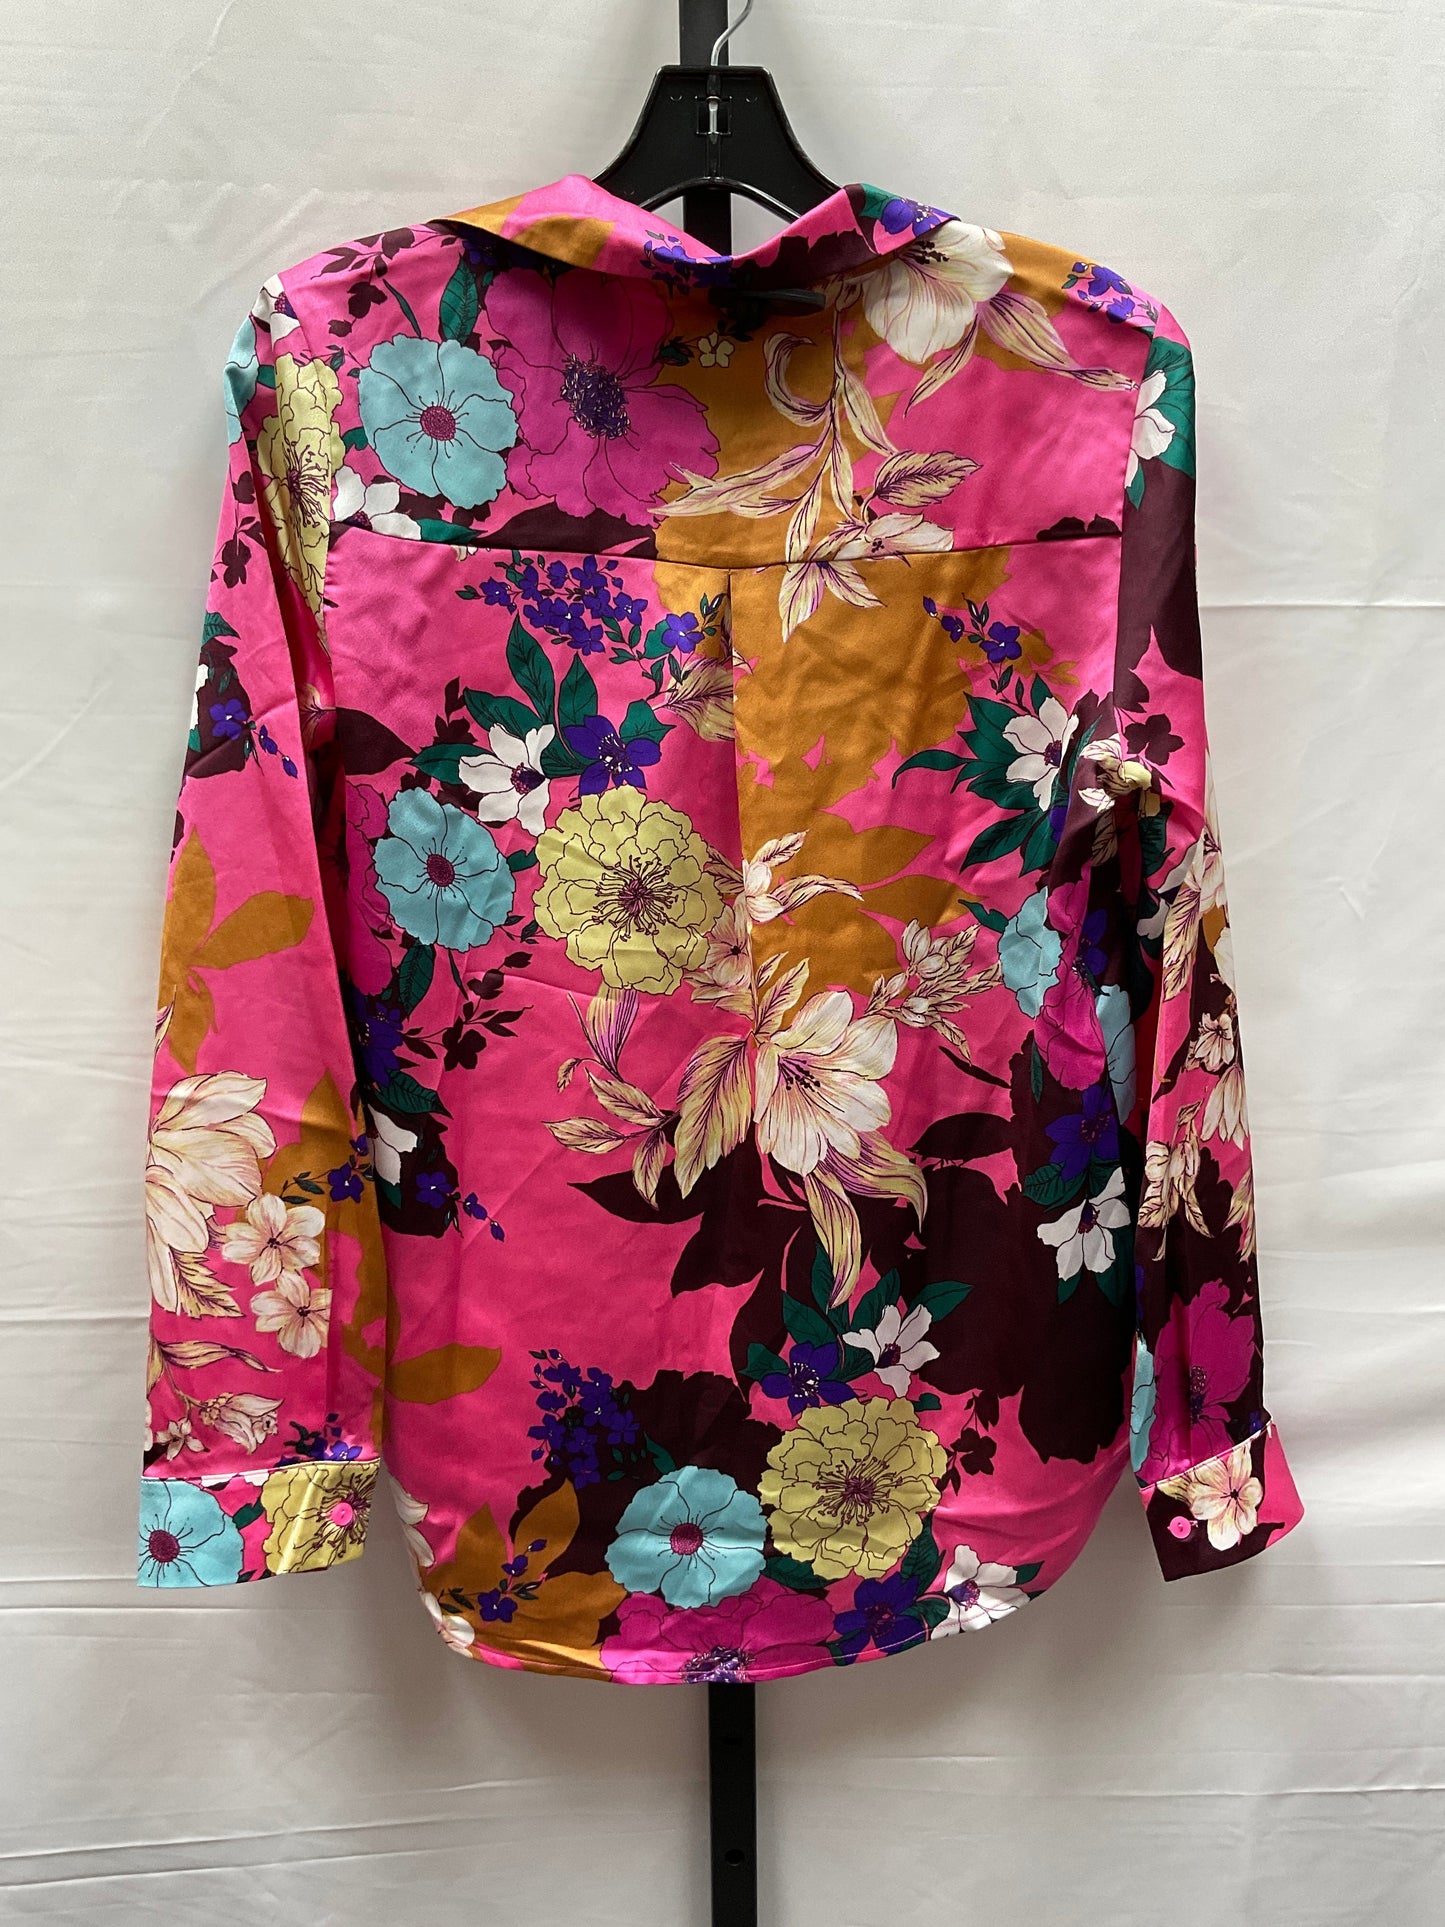 Floral Print Top Long Sleeve Pleione, Size S